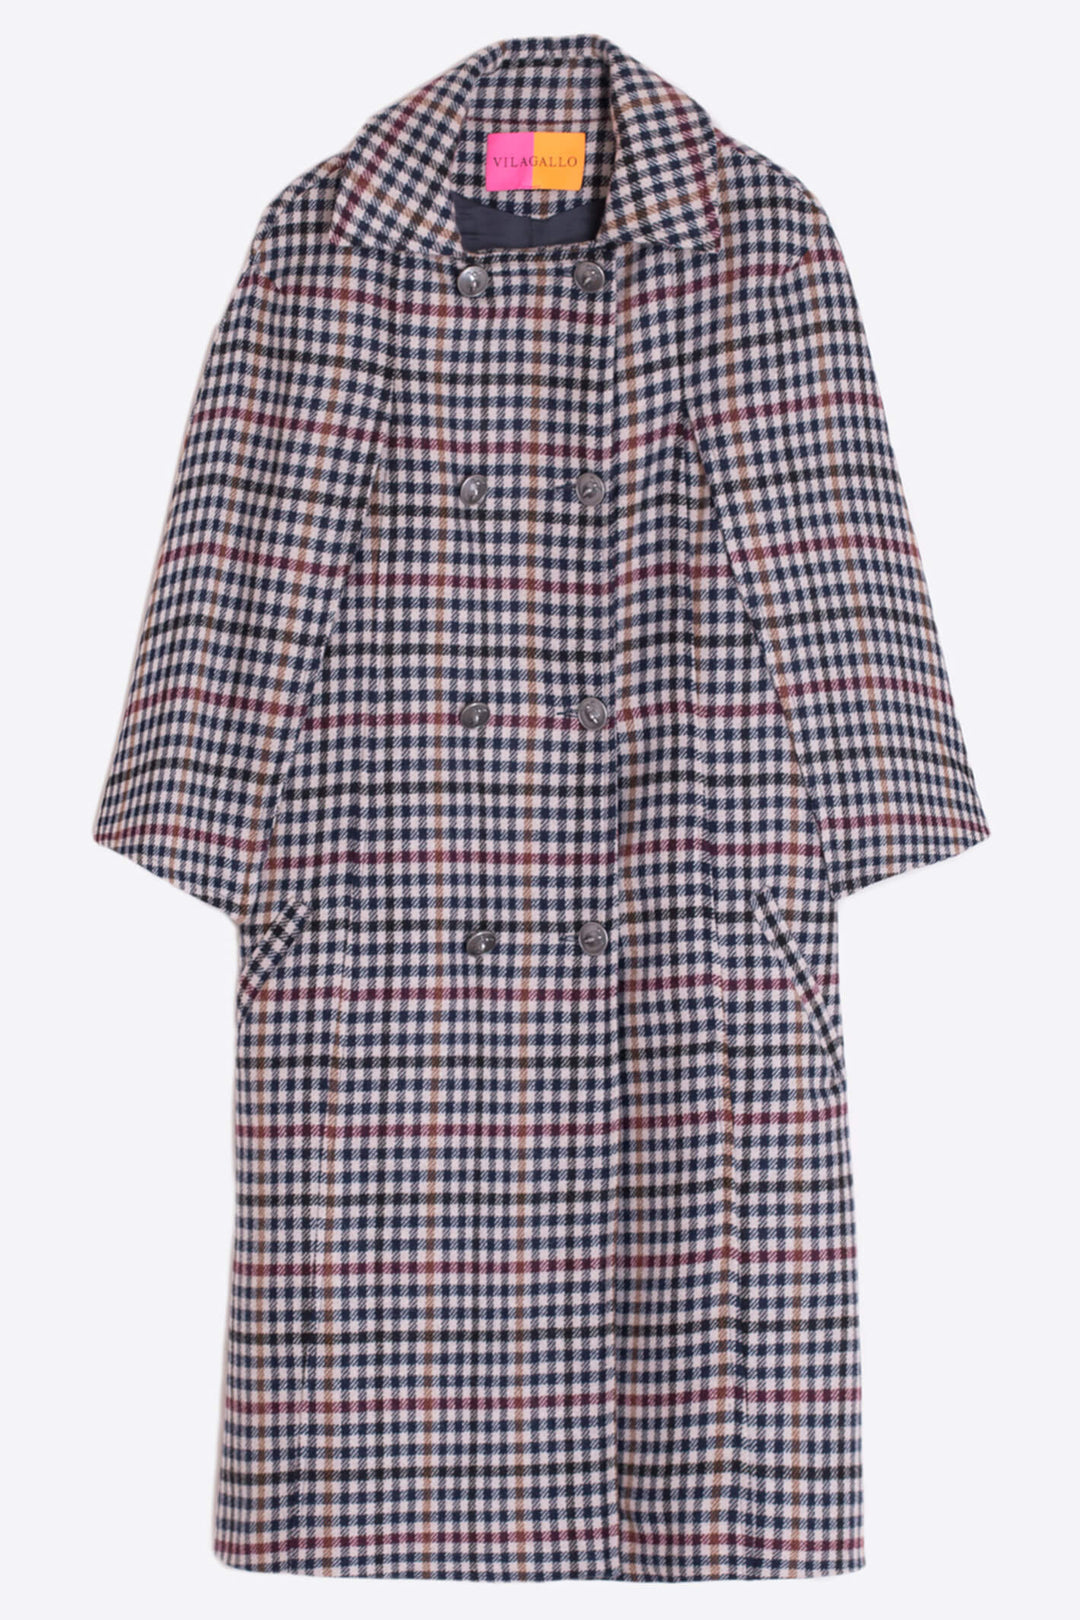 Vilagallo 30748 Navy Dogtooth Print Wool Blend Coat - Experience Boutique